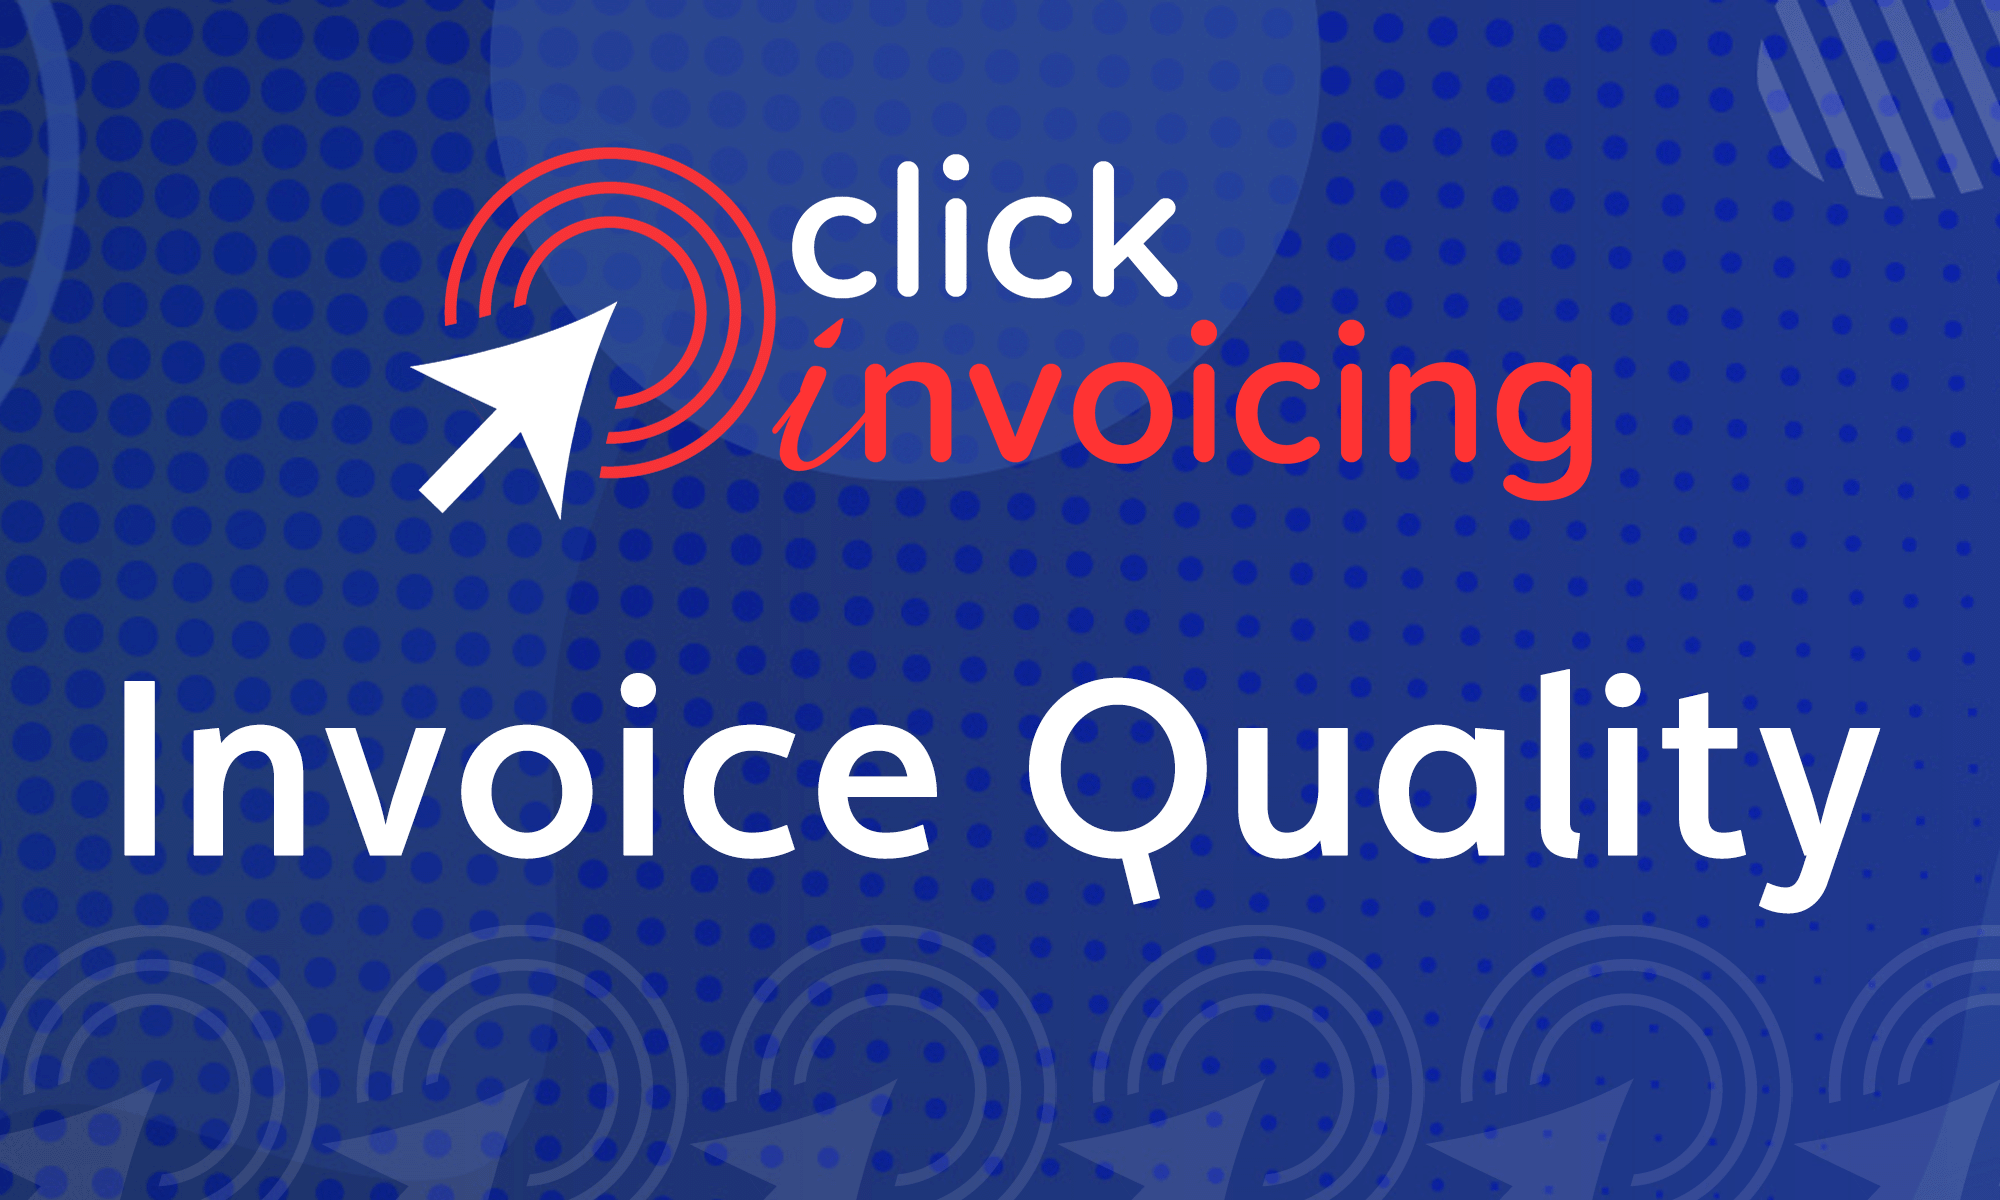 Featured image for “Click Invoicing Invoice Quality”